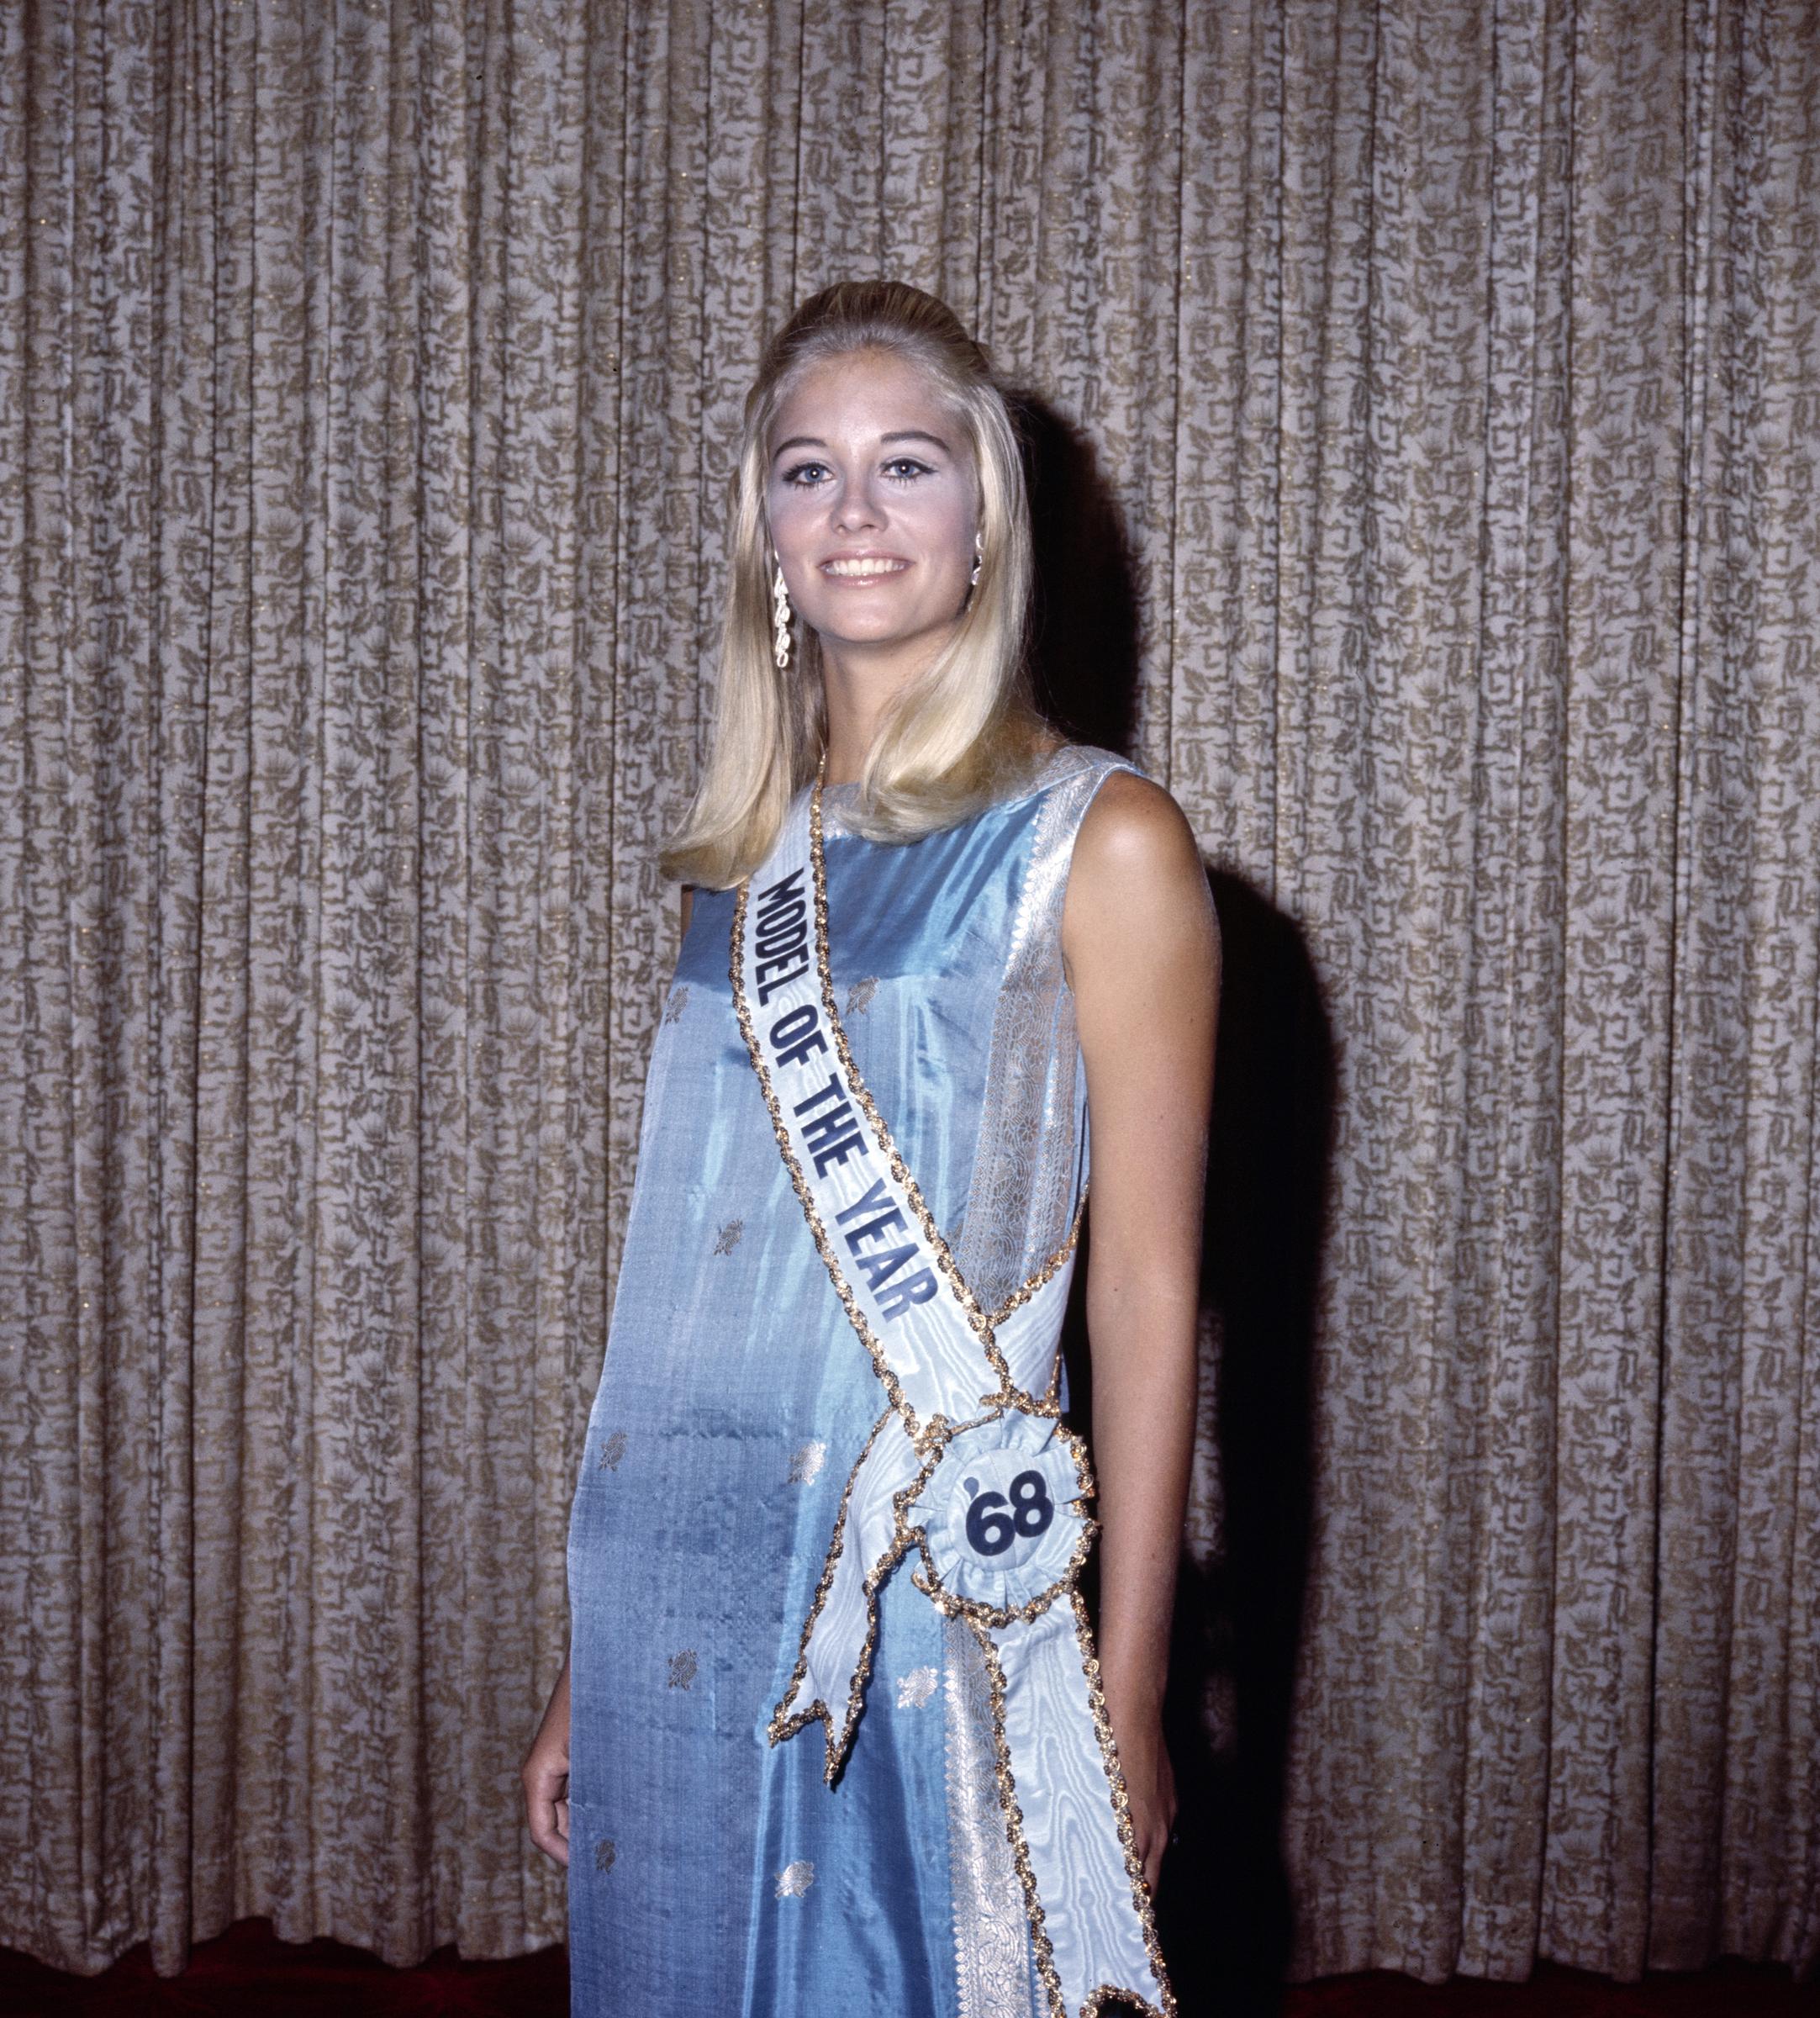 Cybill Shepherd after winning the Model of the Year Pageant on September 14, 1968. | Source: Getty Images